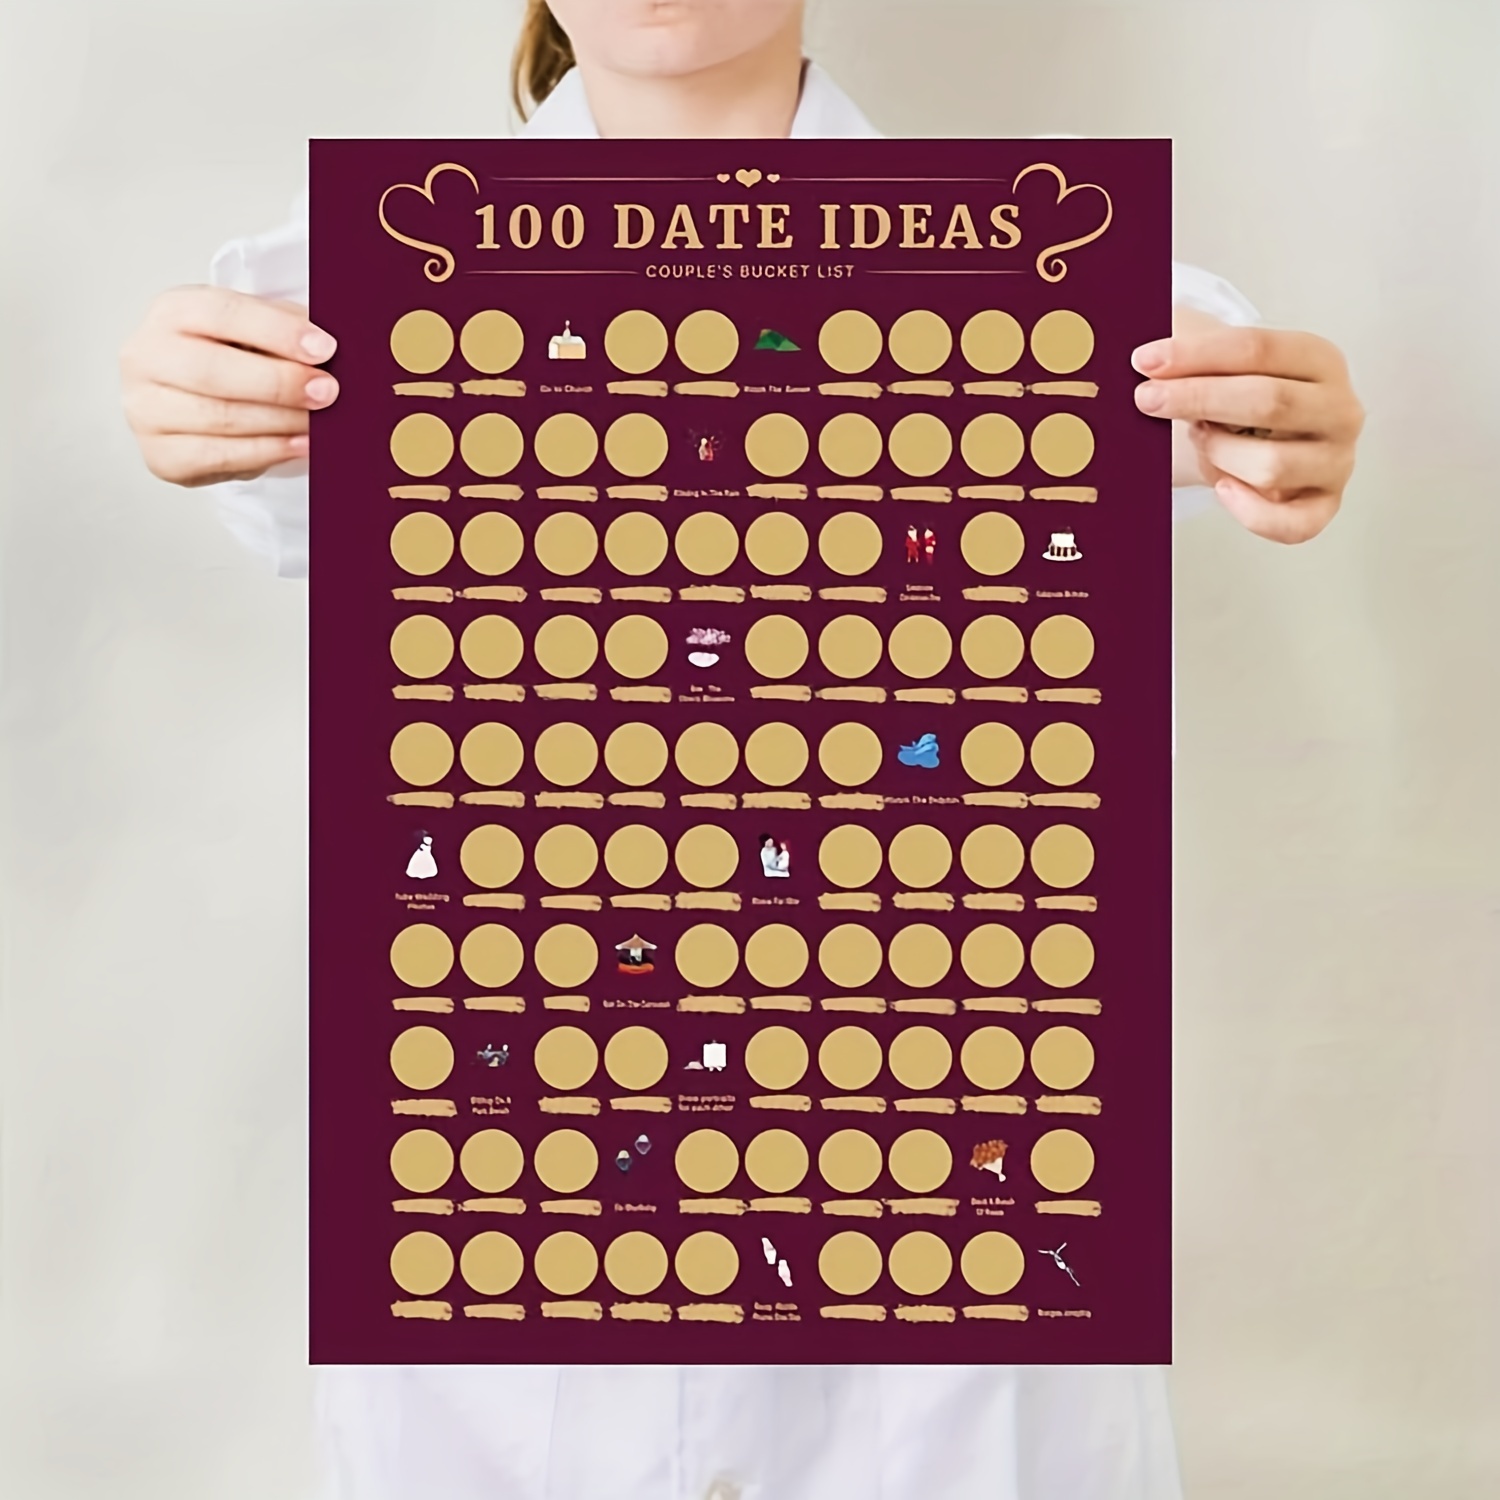  Brainir Surprise 100 Date Ideas Scratch Off Poster - Dates  Poster, Couples Games Night Ideas, Bucket List Wedding Gift, White,  16.5x23.4: Posters & Prints